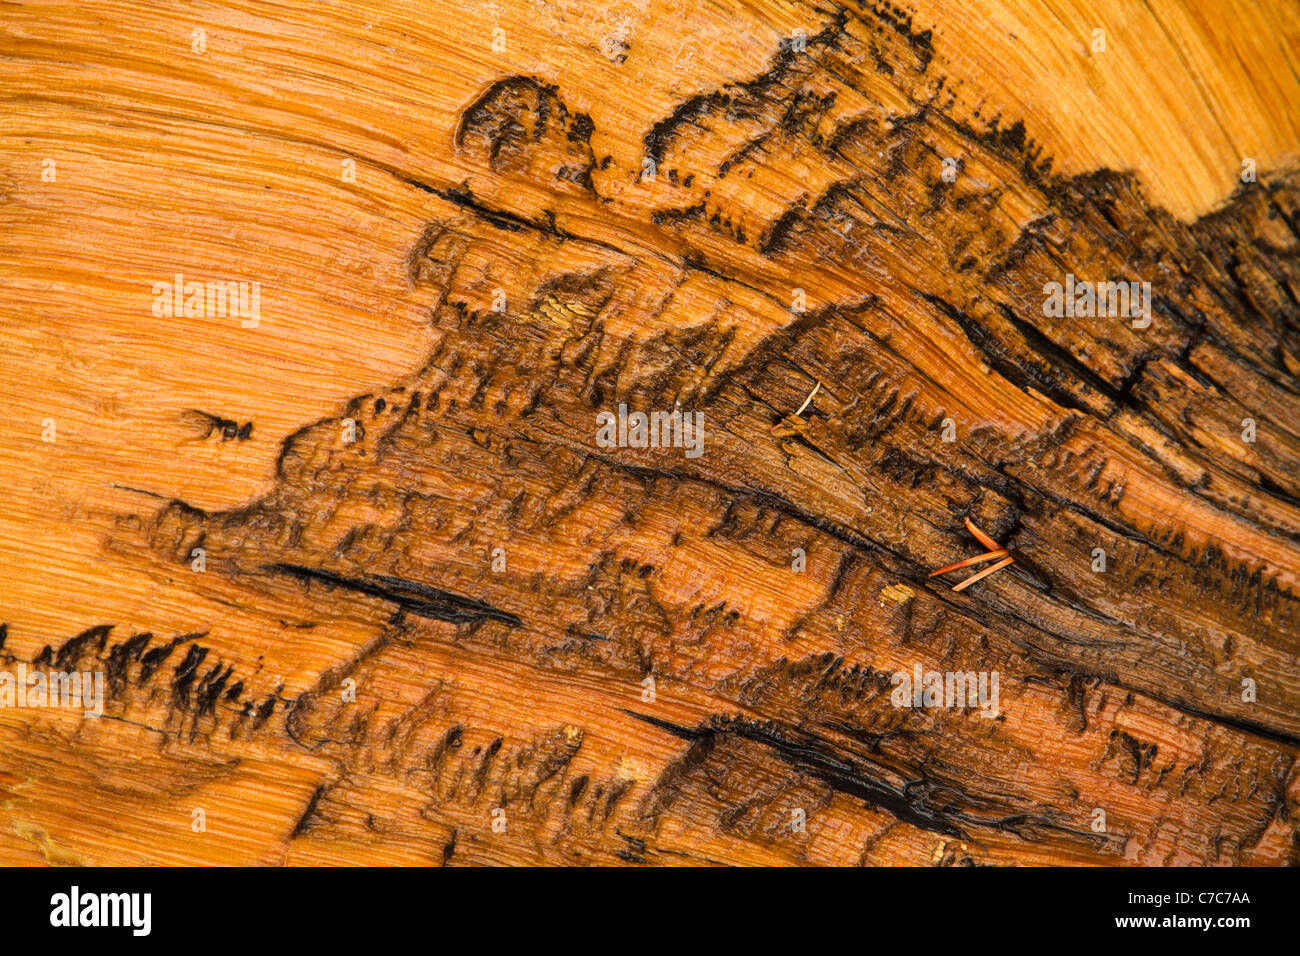 Close up of bark of an ancient bristlecone pine tree in the White Mountains of California/Nevada near Bishop, Califor Stock Photo